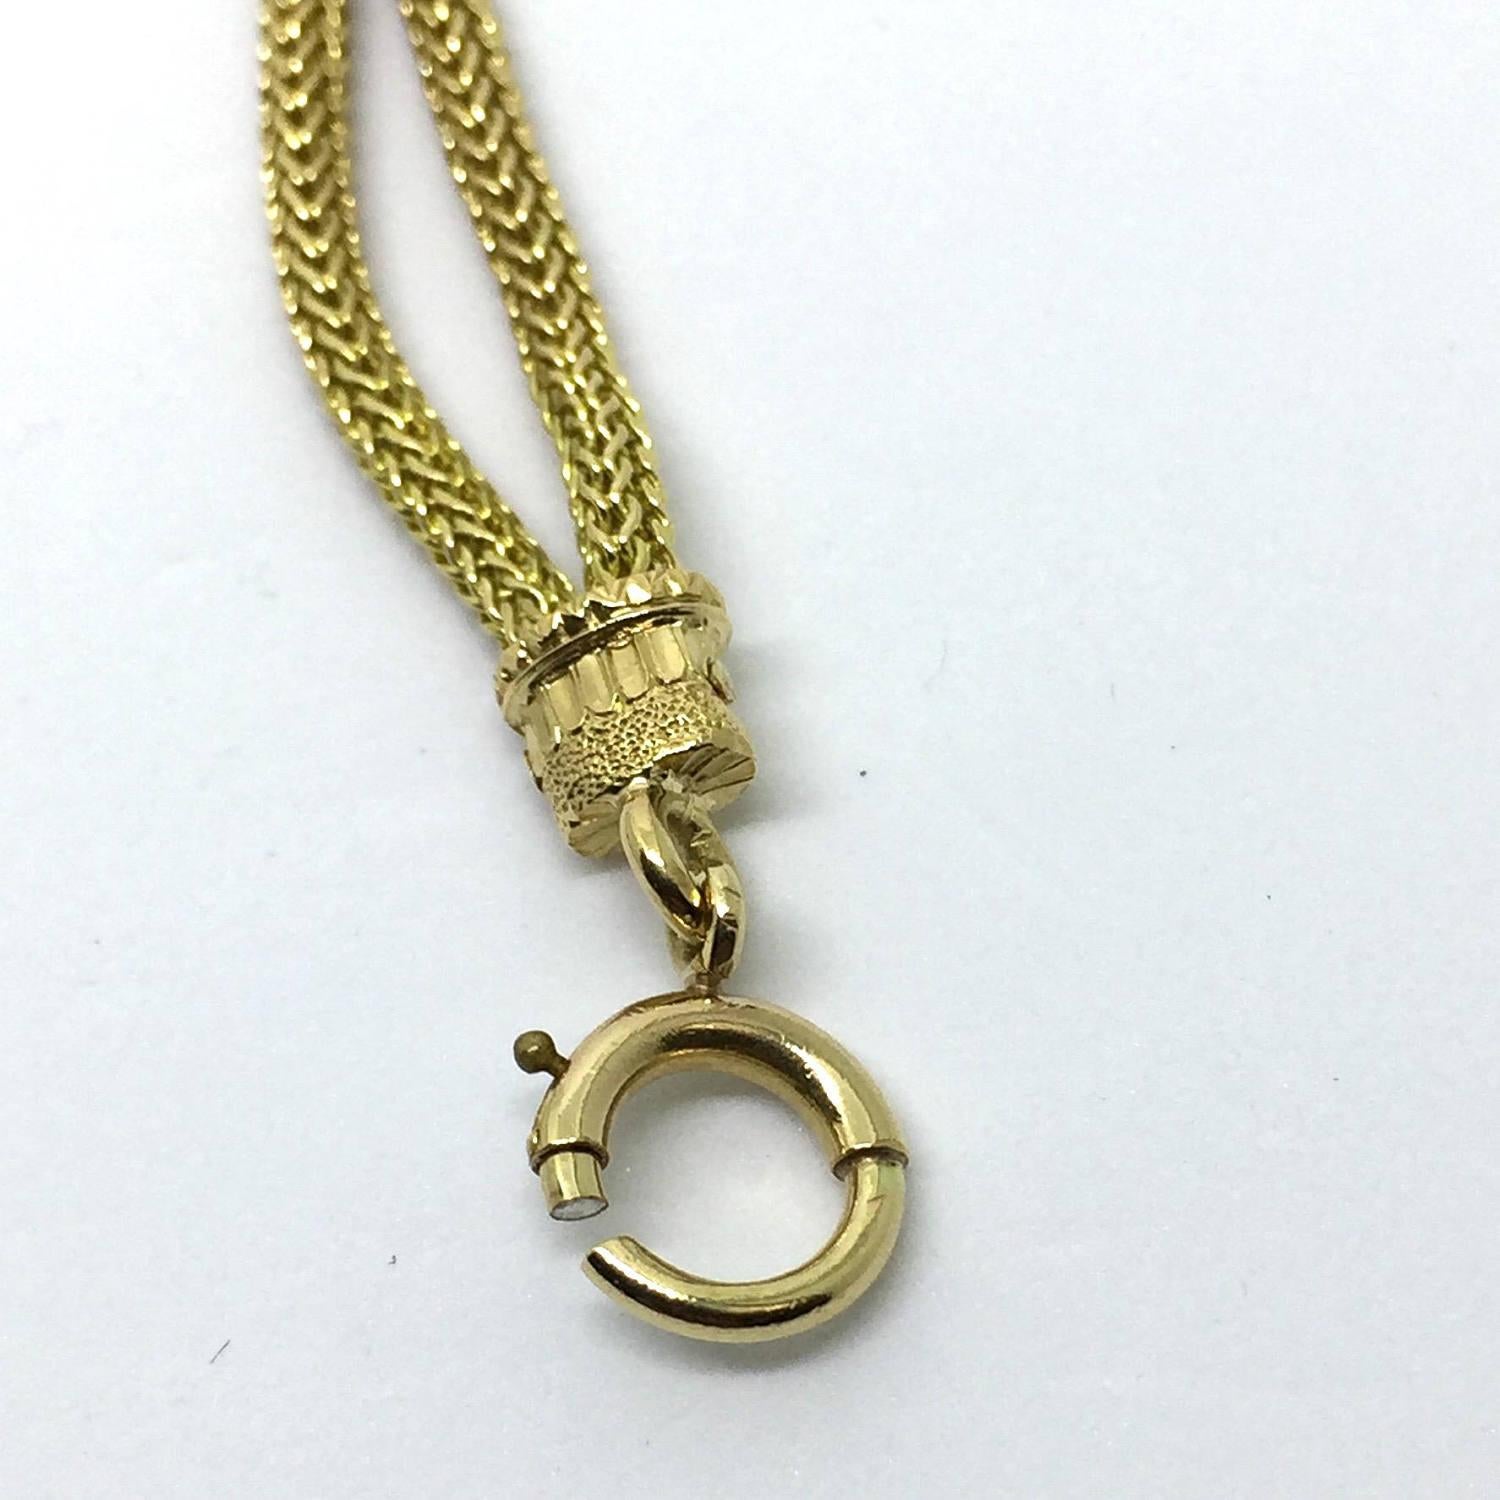 Victorian 18 Karat Yellow Gold Fob and Watch Winder Key

This elegant piece features a fob and watch winder key on a 18K gold chain. The fob is detailed with a bloodstone measuring 9 mm and accented with one round brilliant diamond and one rose cut